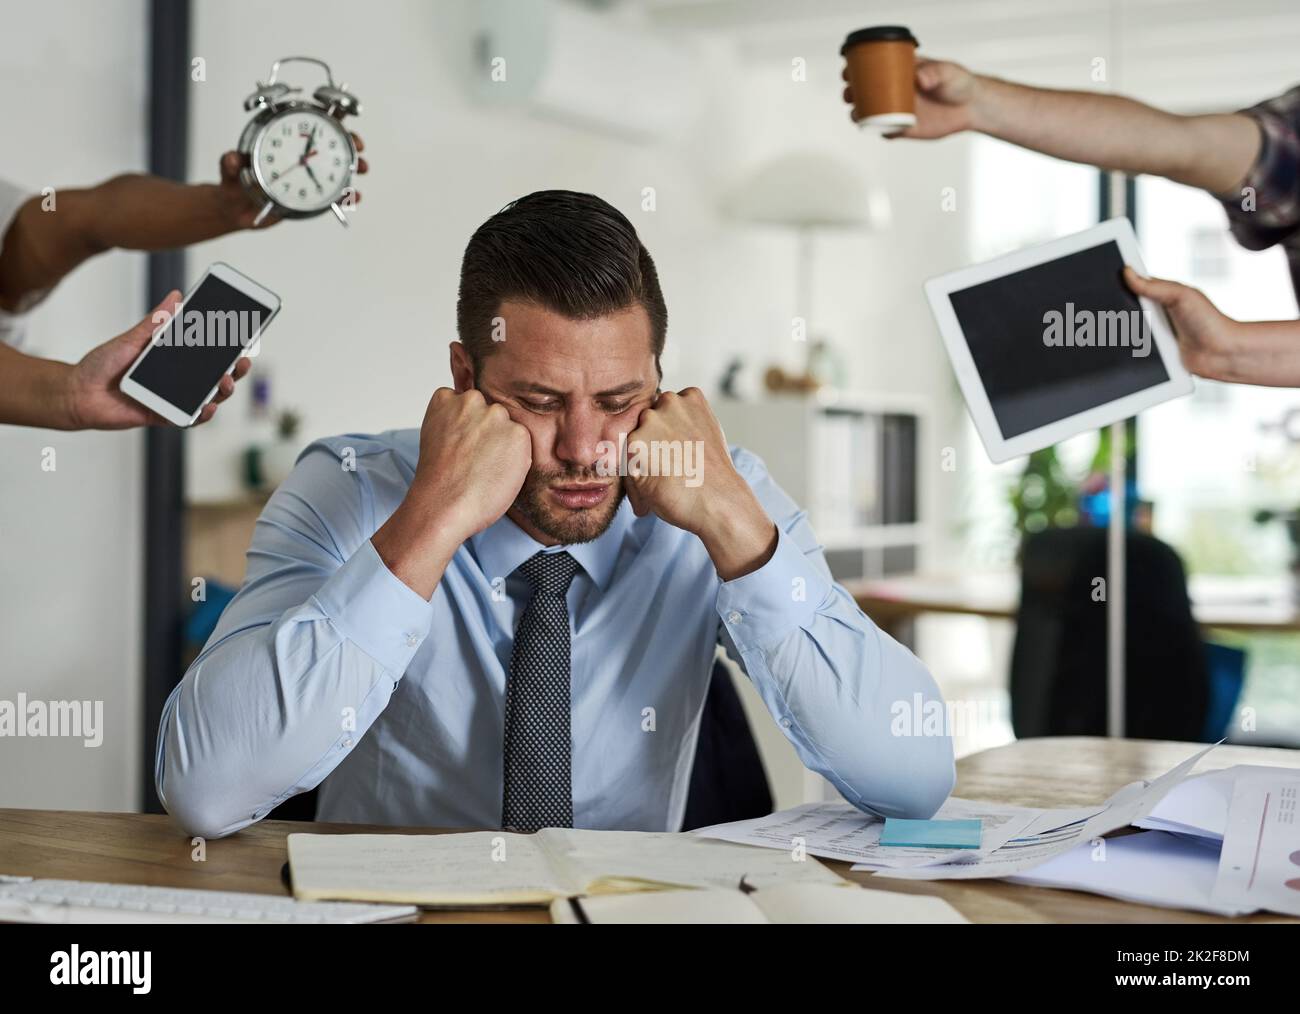 Wishing his deadlines away. Shot of a stressed out businessman surrounded by demanding colleagues in an office. Stock Photo